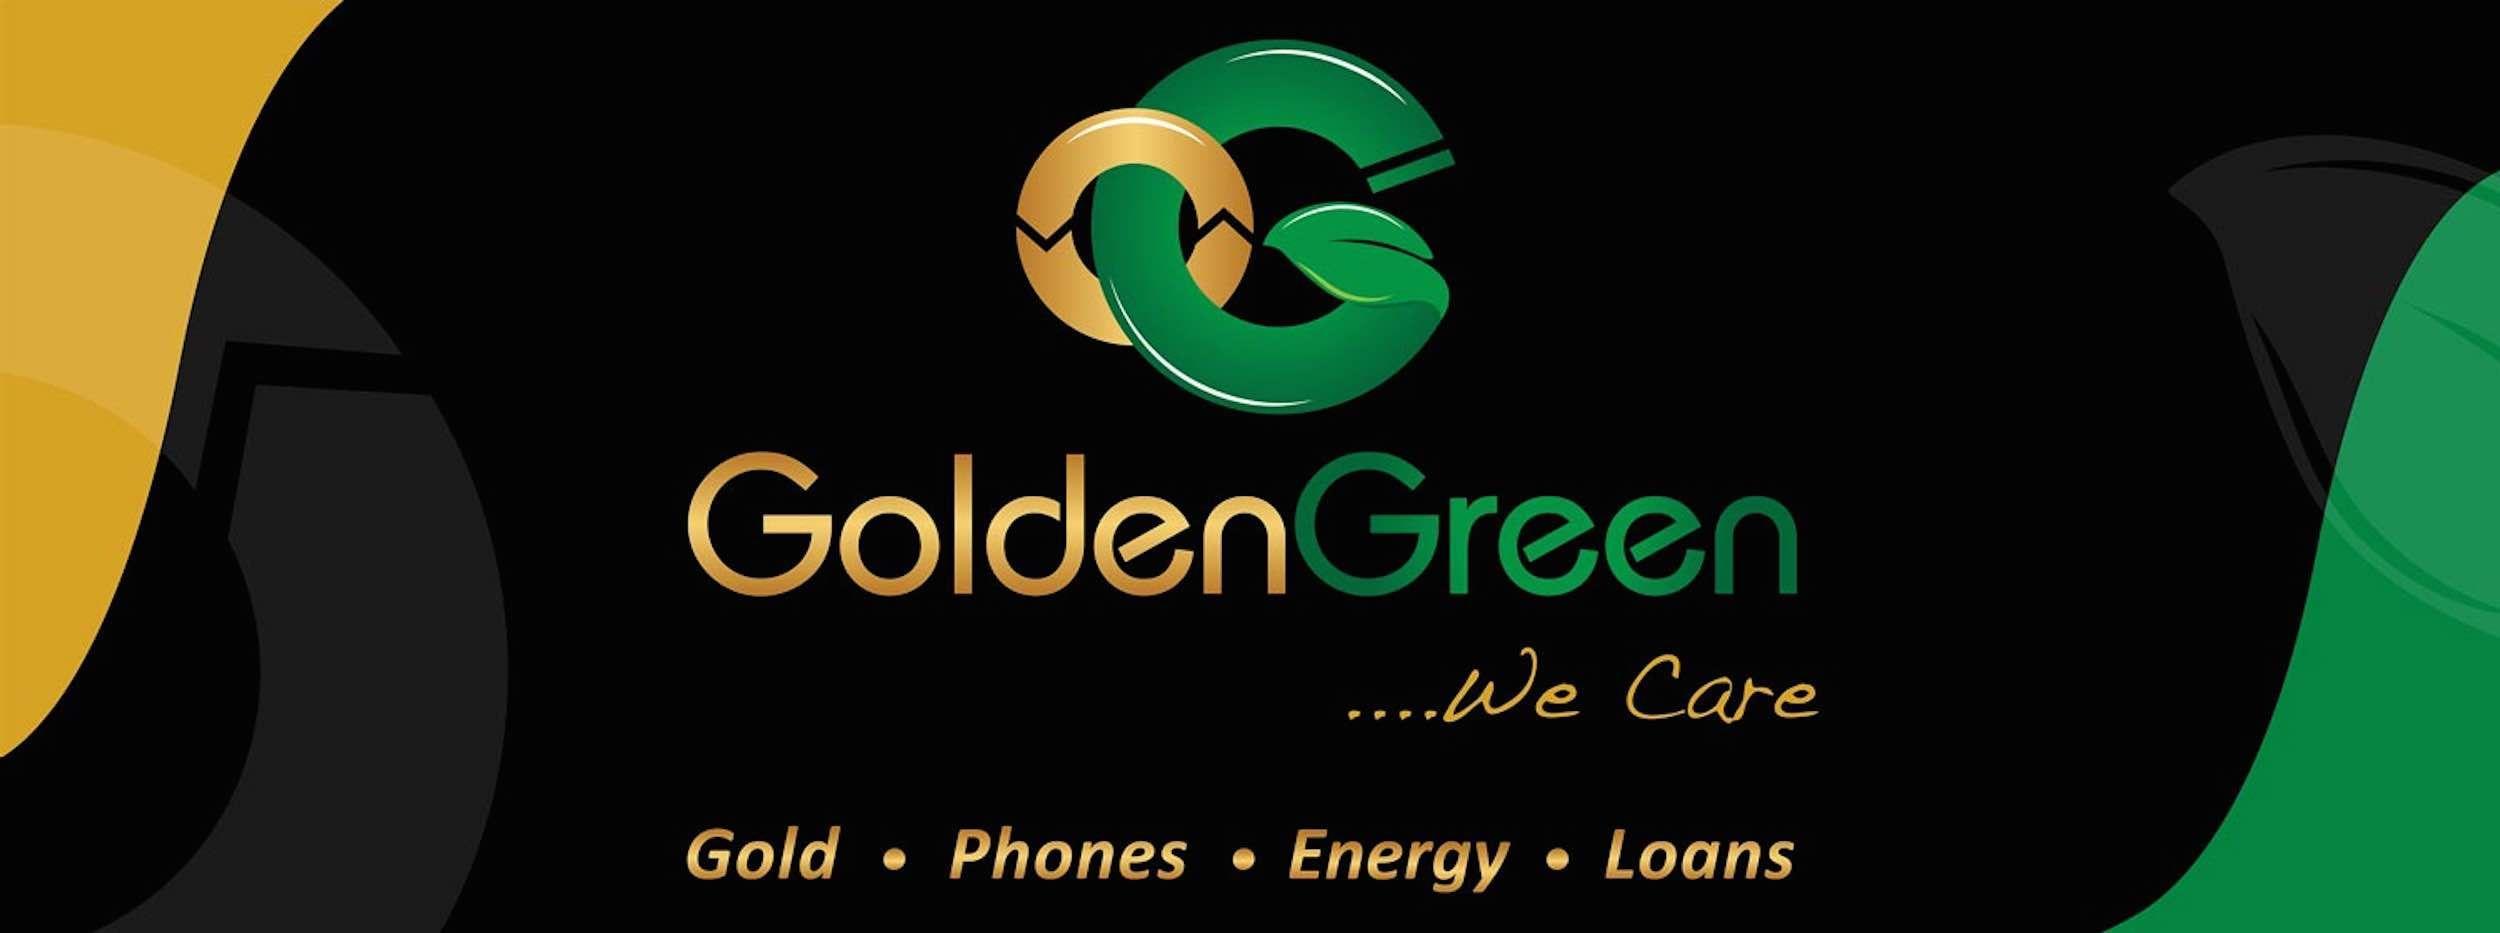 A Great Green and Gold Logo - GoldenGreen - Home